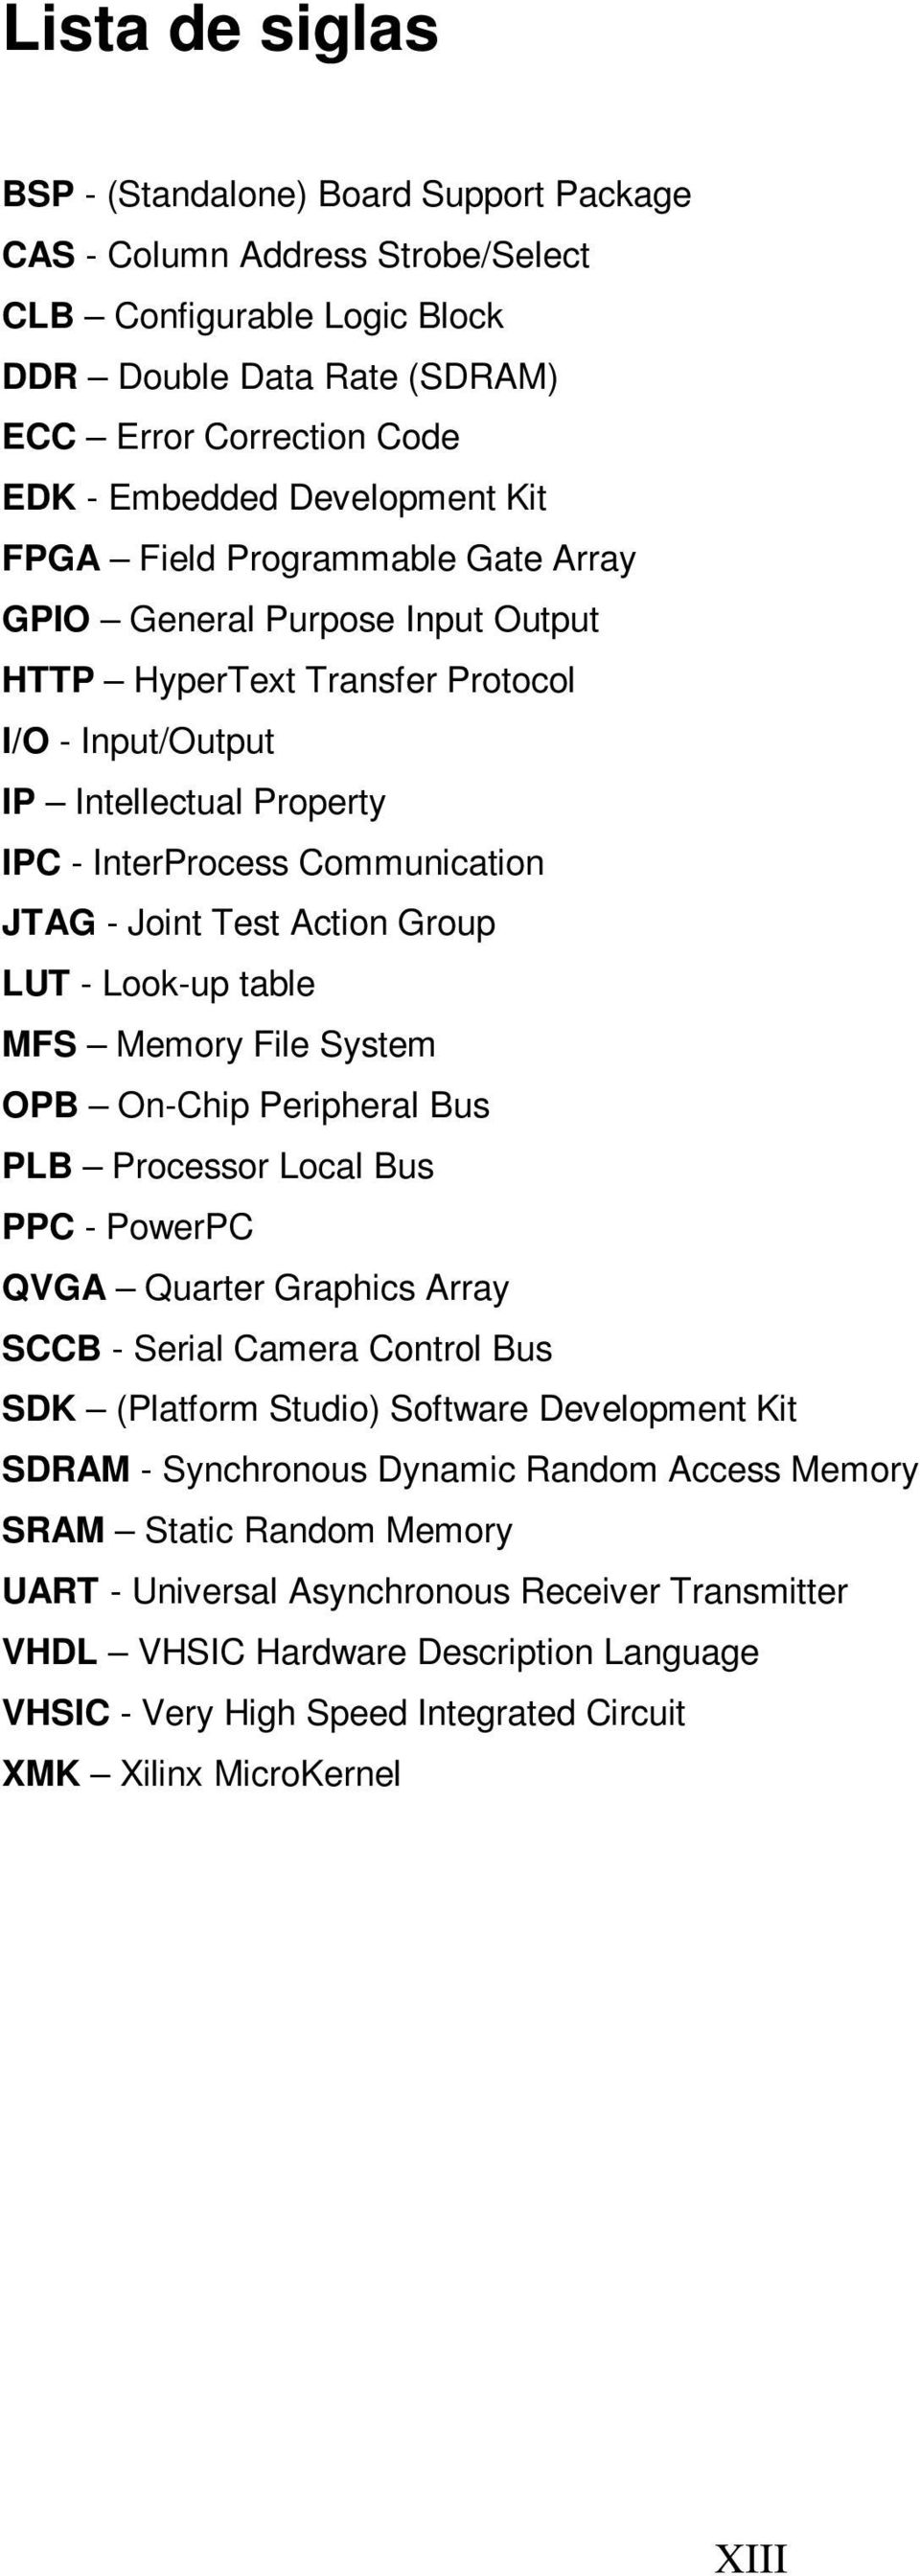 - Joint Test Action Group LUT - Look-up table MFS Memory File System OPB On-Chip Peripheral Bus PLB Processor Local Bus PPC - PowerPC QVGA Quarter Graphics Array SCCB - Serial Camera Control Bus SDK